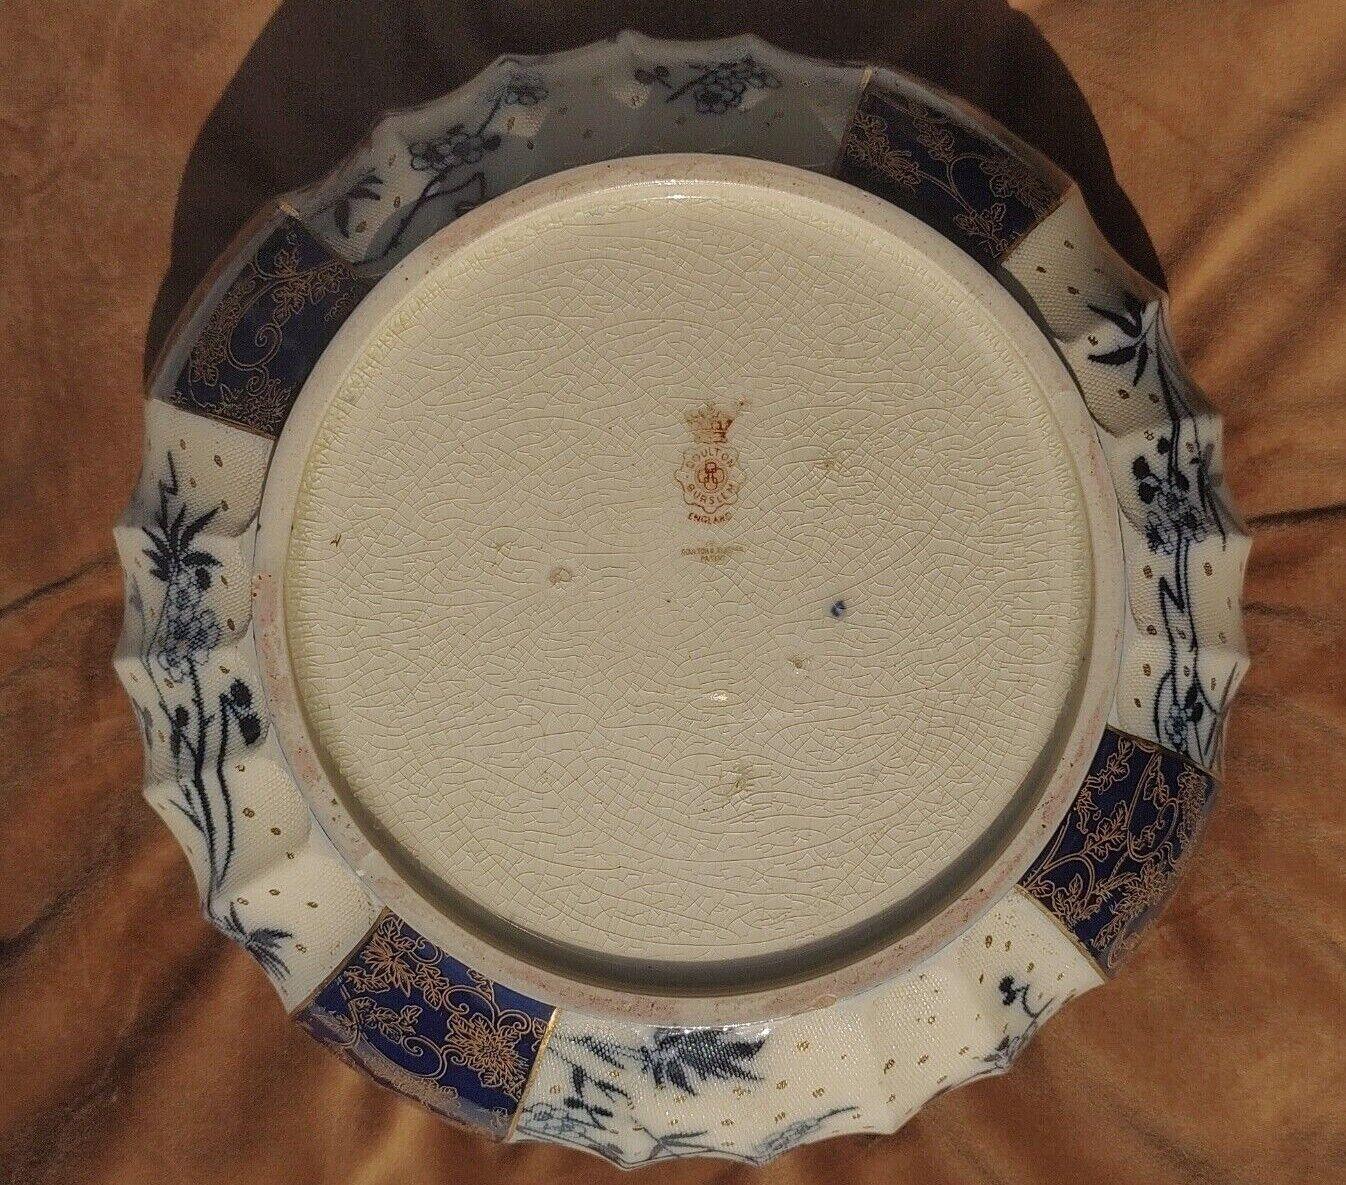 Doulton Burslem Flow Blue and White Salad Bowl Gilt Silver Plated 10" - Tommy's Treasure